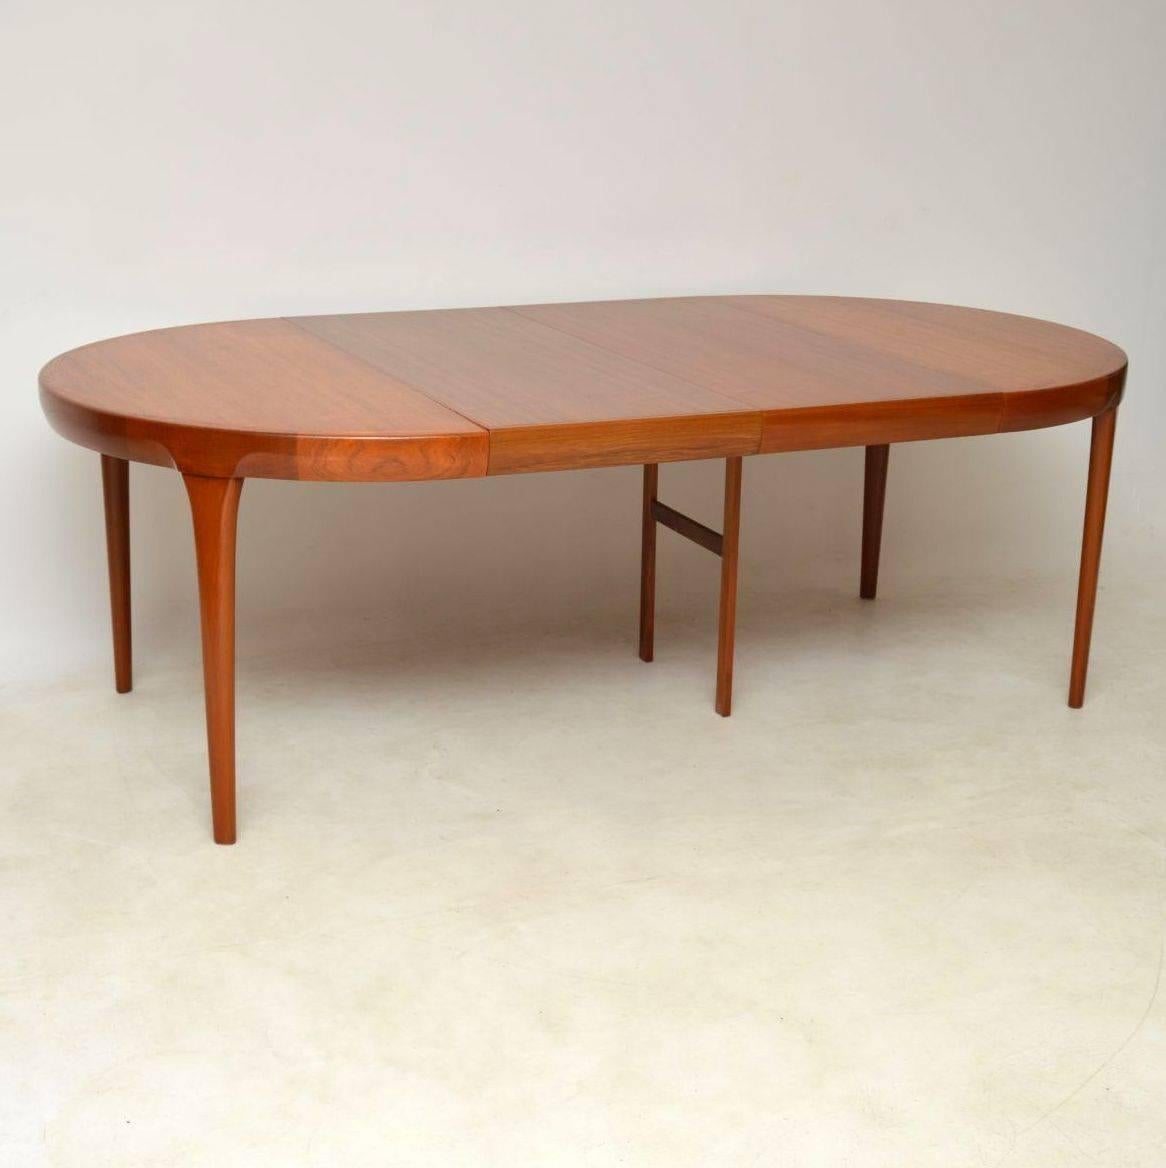 A stunning vintage Danish teak dining table of the highest quality, this was designed by the great IB Kofod Larsen. It dates from the 1960s, we have had this stripped and re-polished to a very high standard, the condition is superb throughout. This